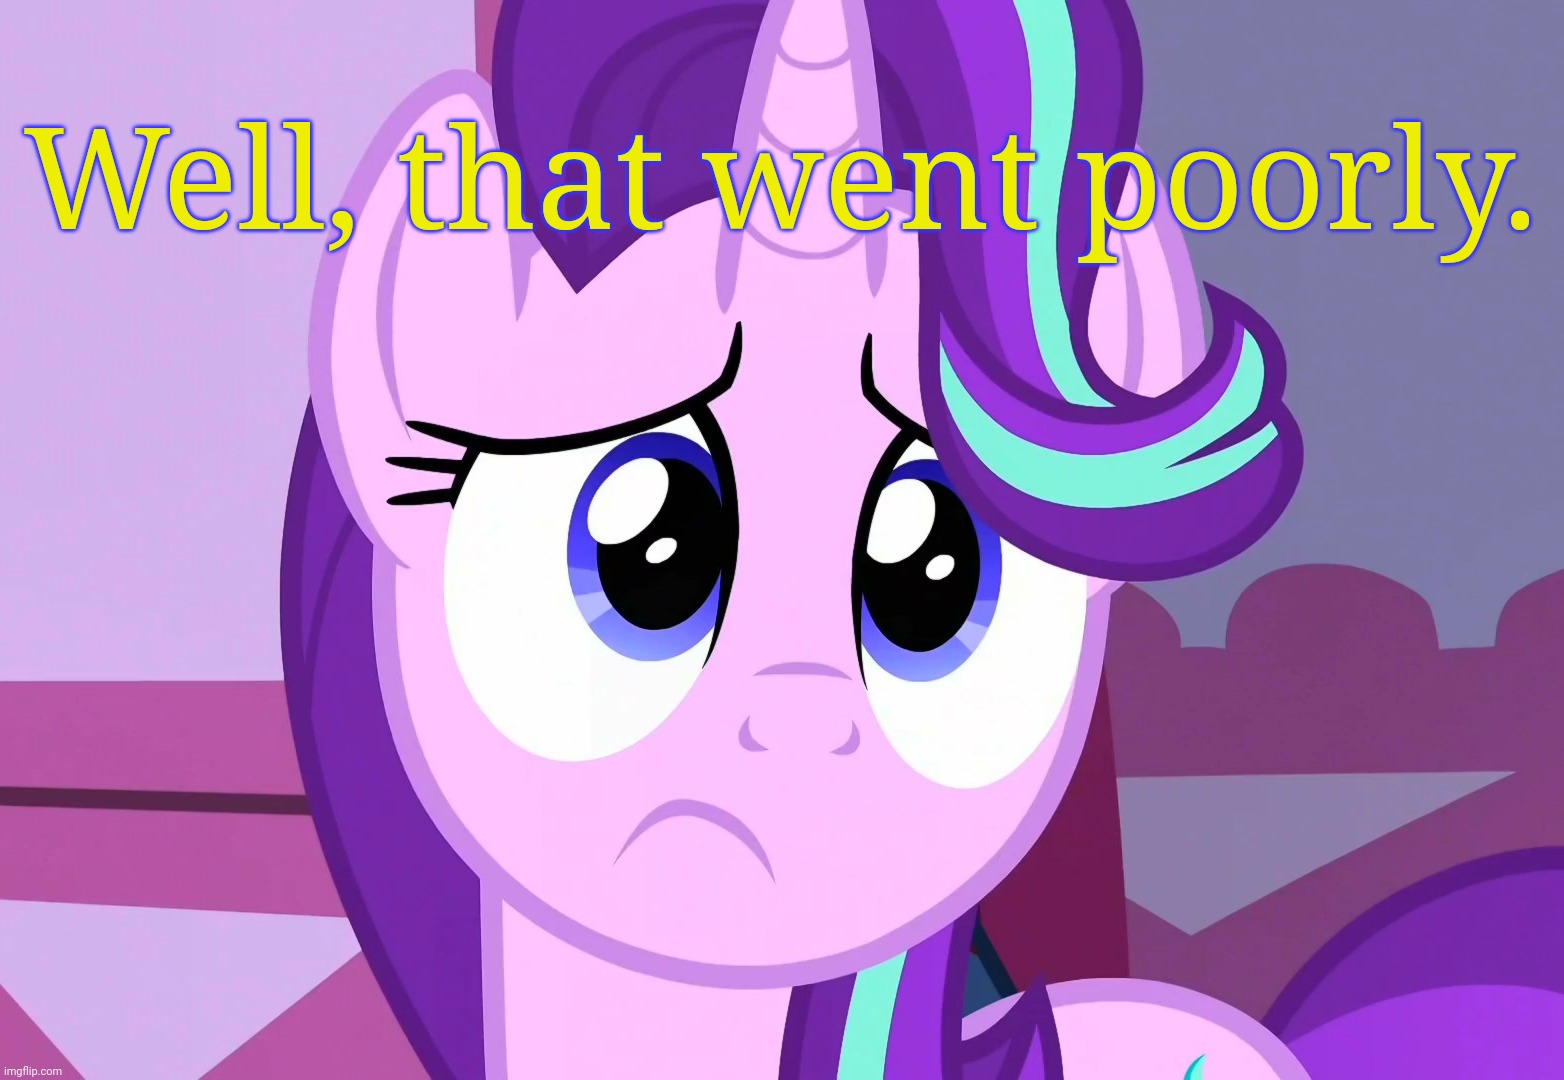 Sadlight Glimmer (MLP) | Well, that went poorly. | image tagged in sadlight glimmer mlp | made w/ Imgflip meme maker